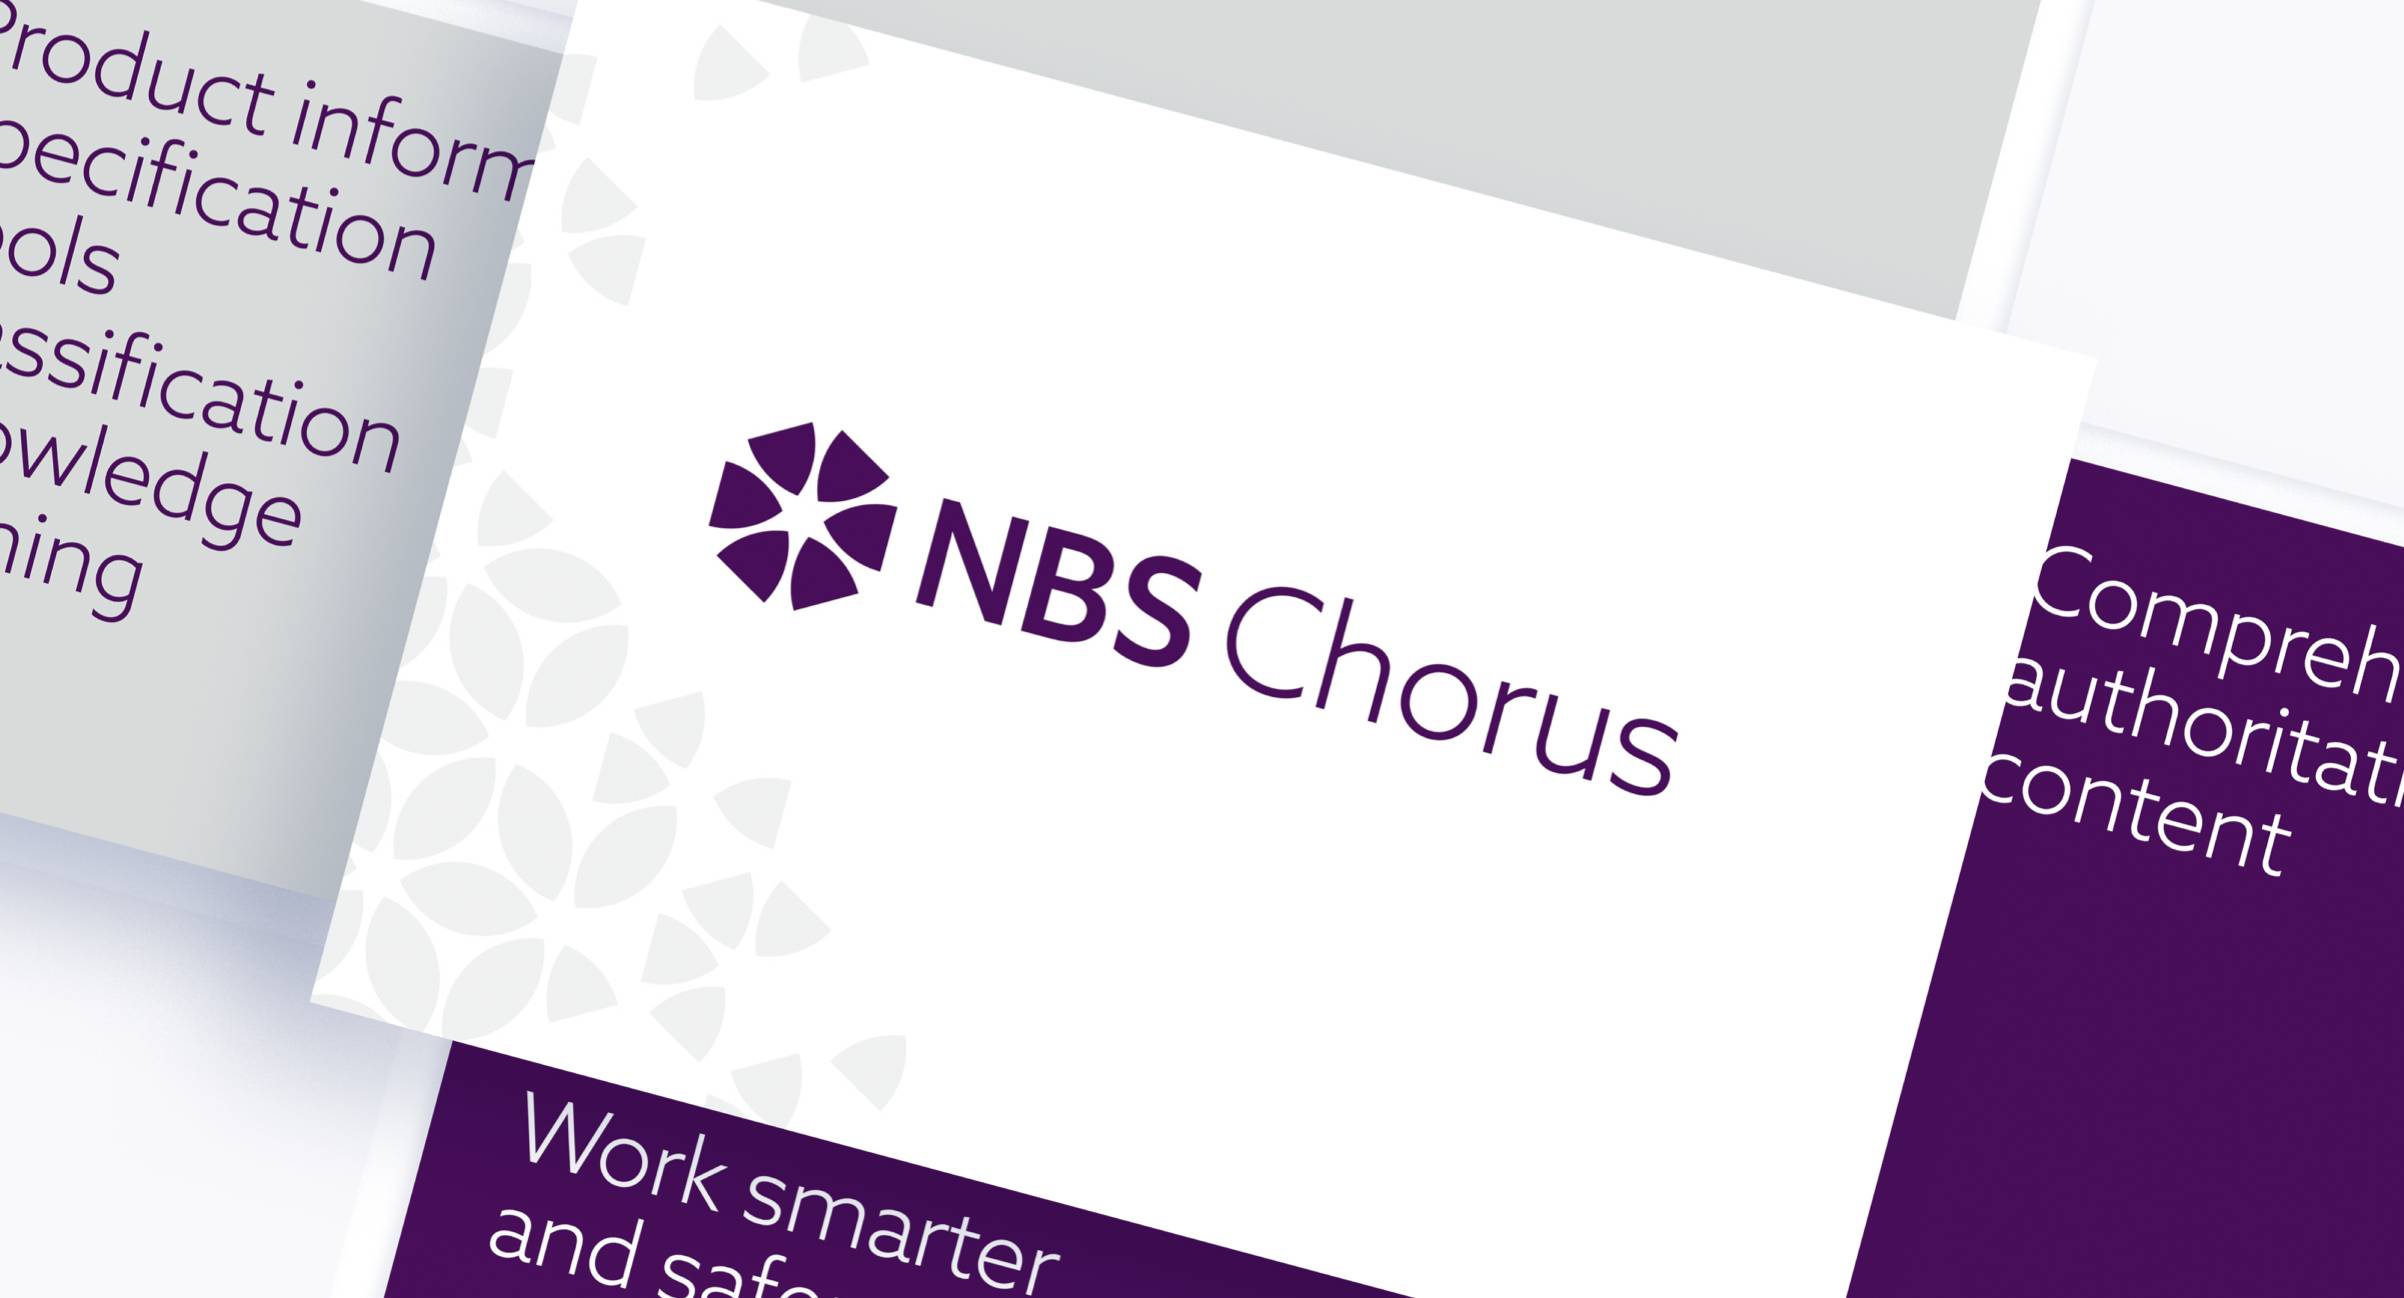 White card with "NBS Chorus" on it and purple cards behind with abstract text on them